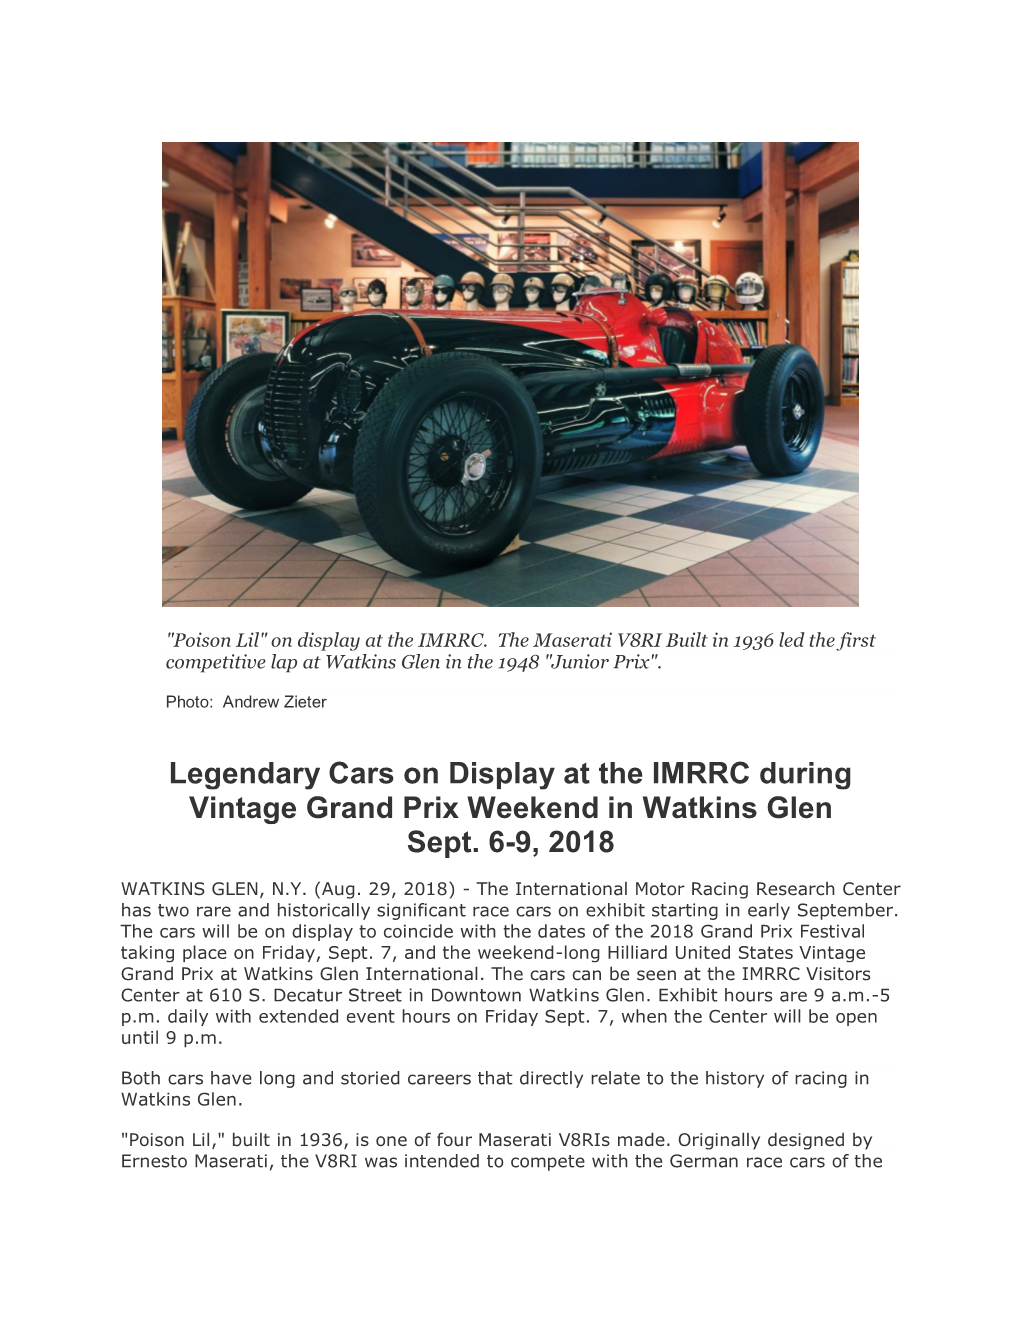 Legendary Cars on Display at the IMRRC During Vintage Grand Prix Weekend in Watkins Glen Sept. 6-9, 2018